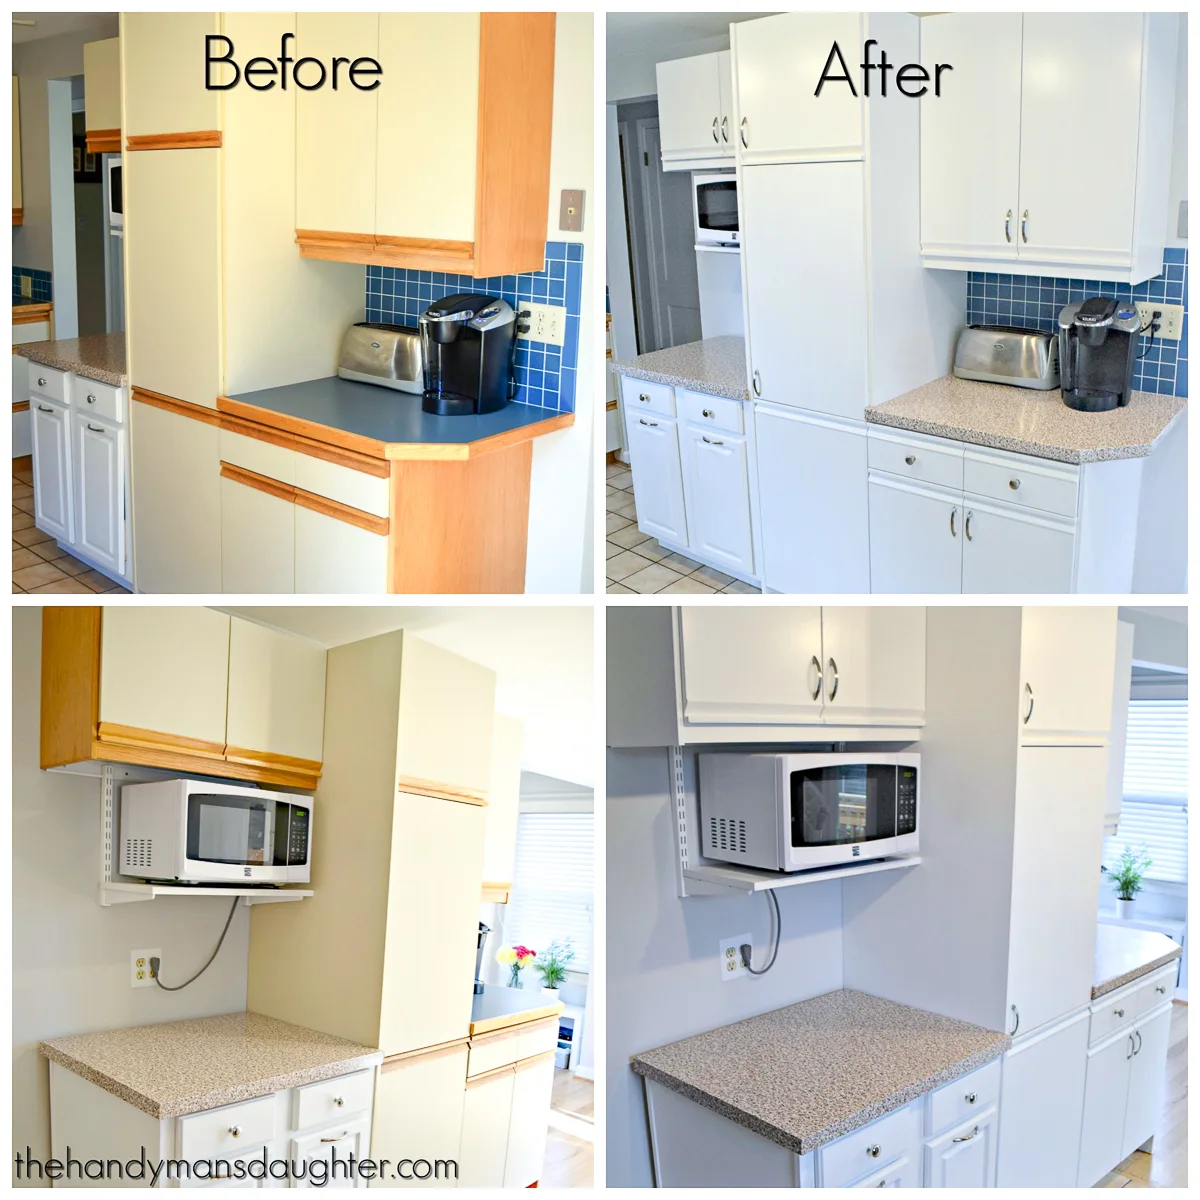 https://www.thehandymansdaughter.com/wp-content/uploads/2022/06/how-to-paint-laminate-cabinets-before-after.jpg.webp